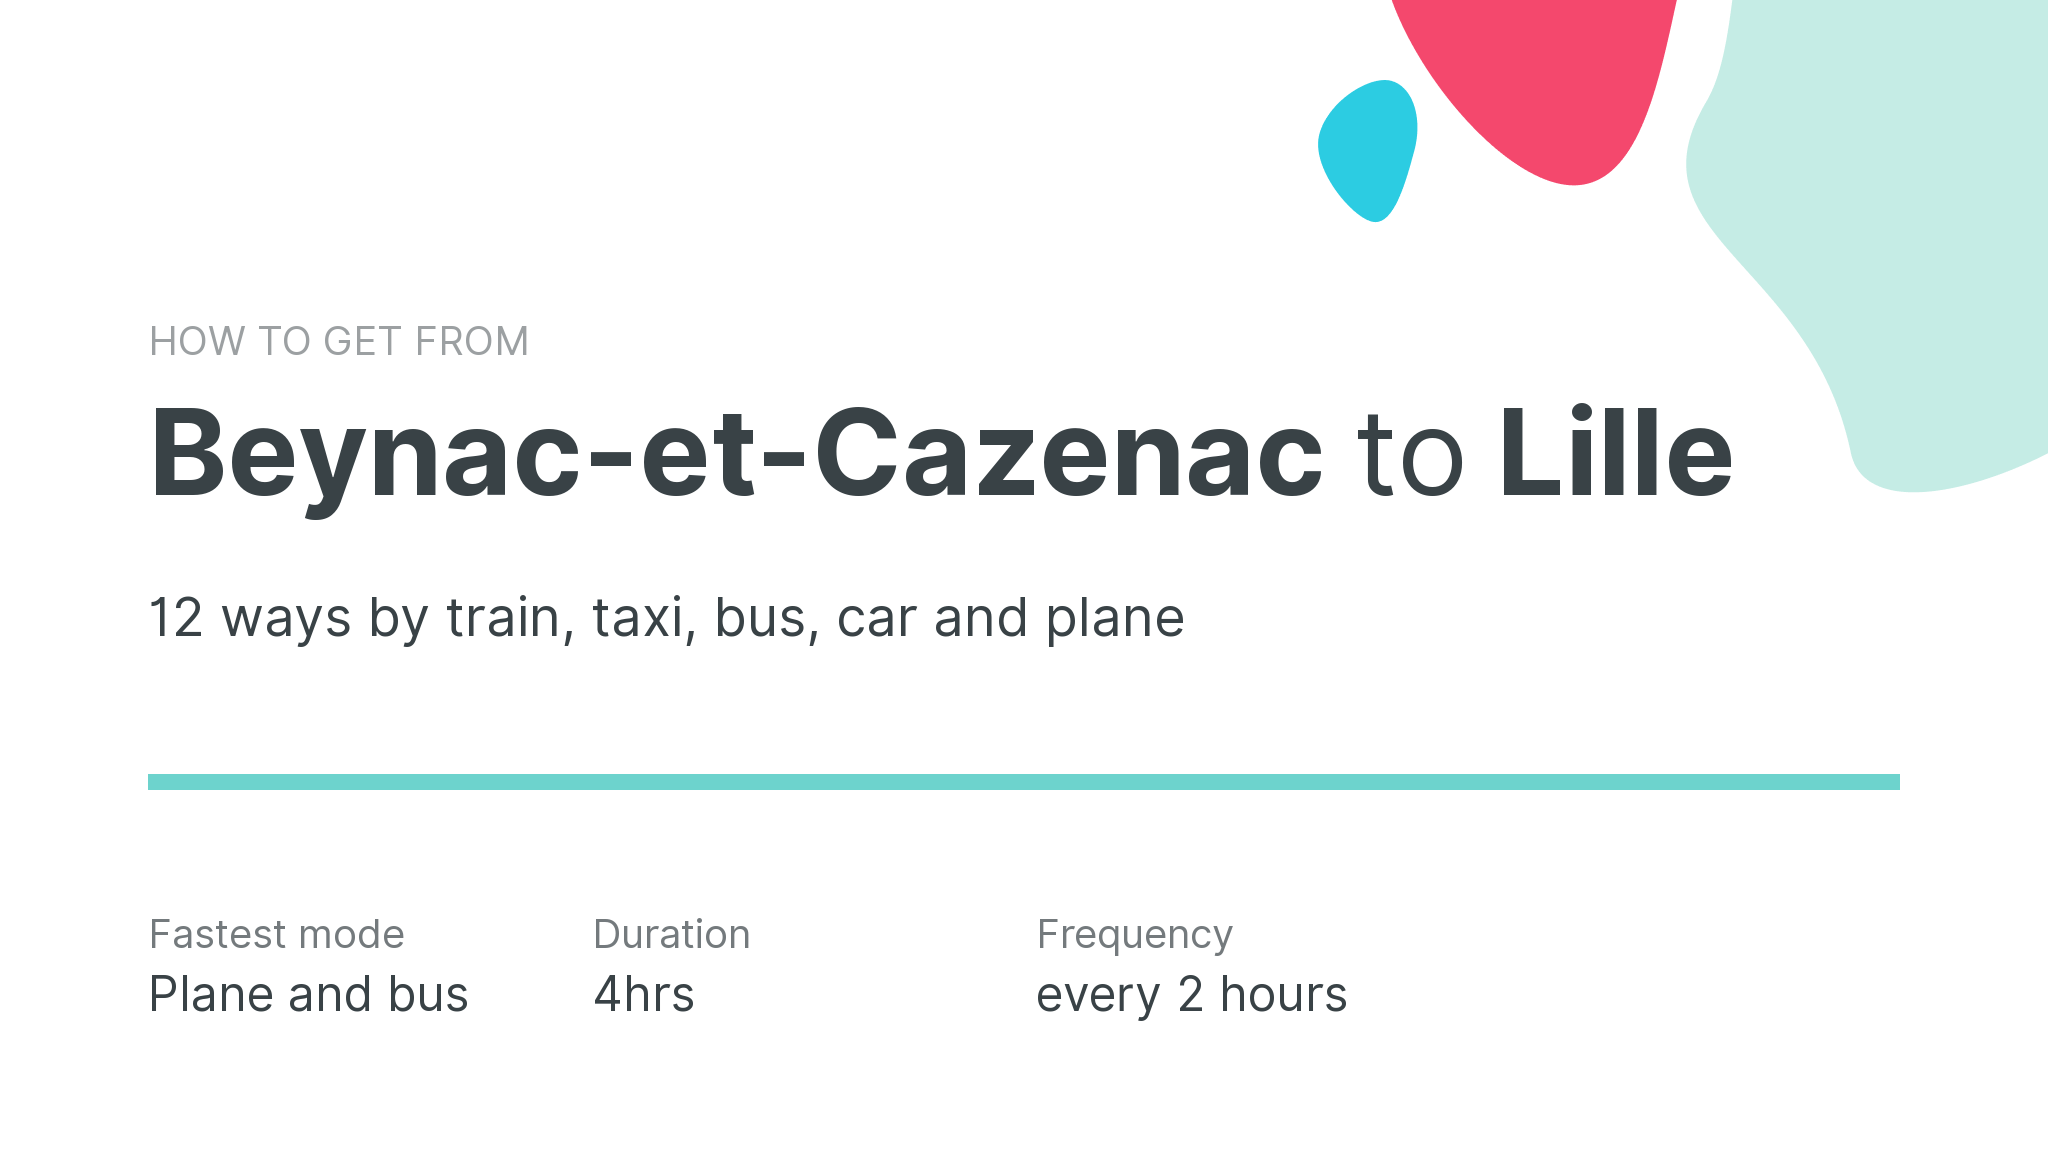 How do I get from Beynac-et-Cazenac to Lille